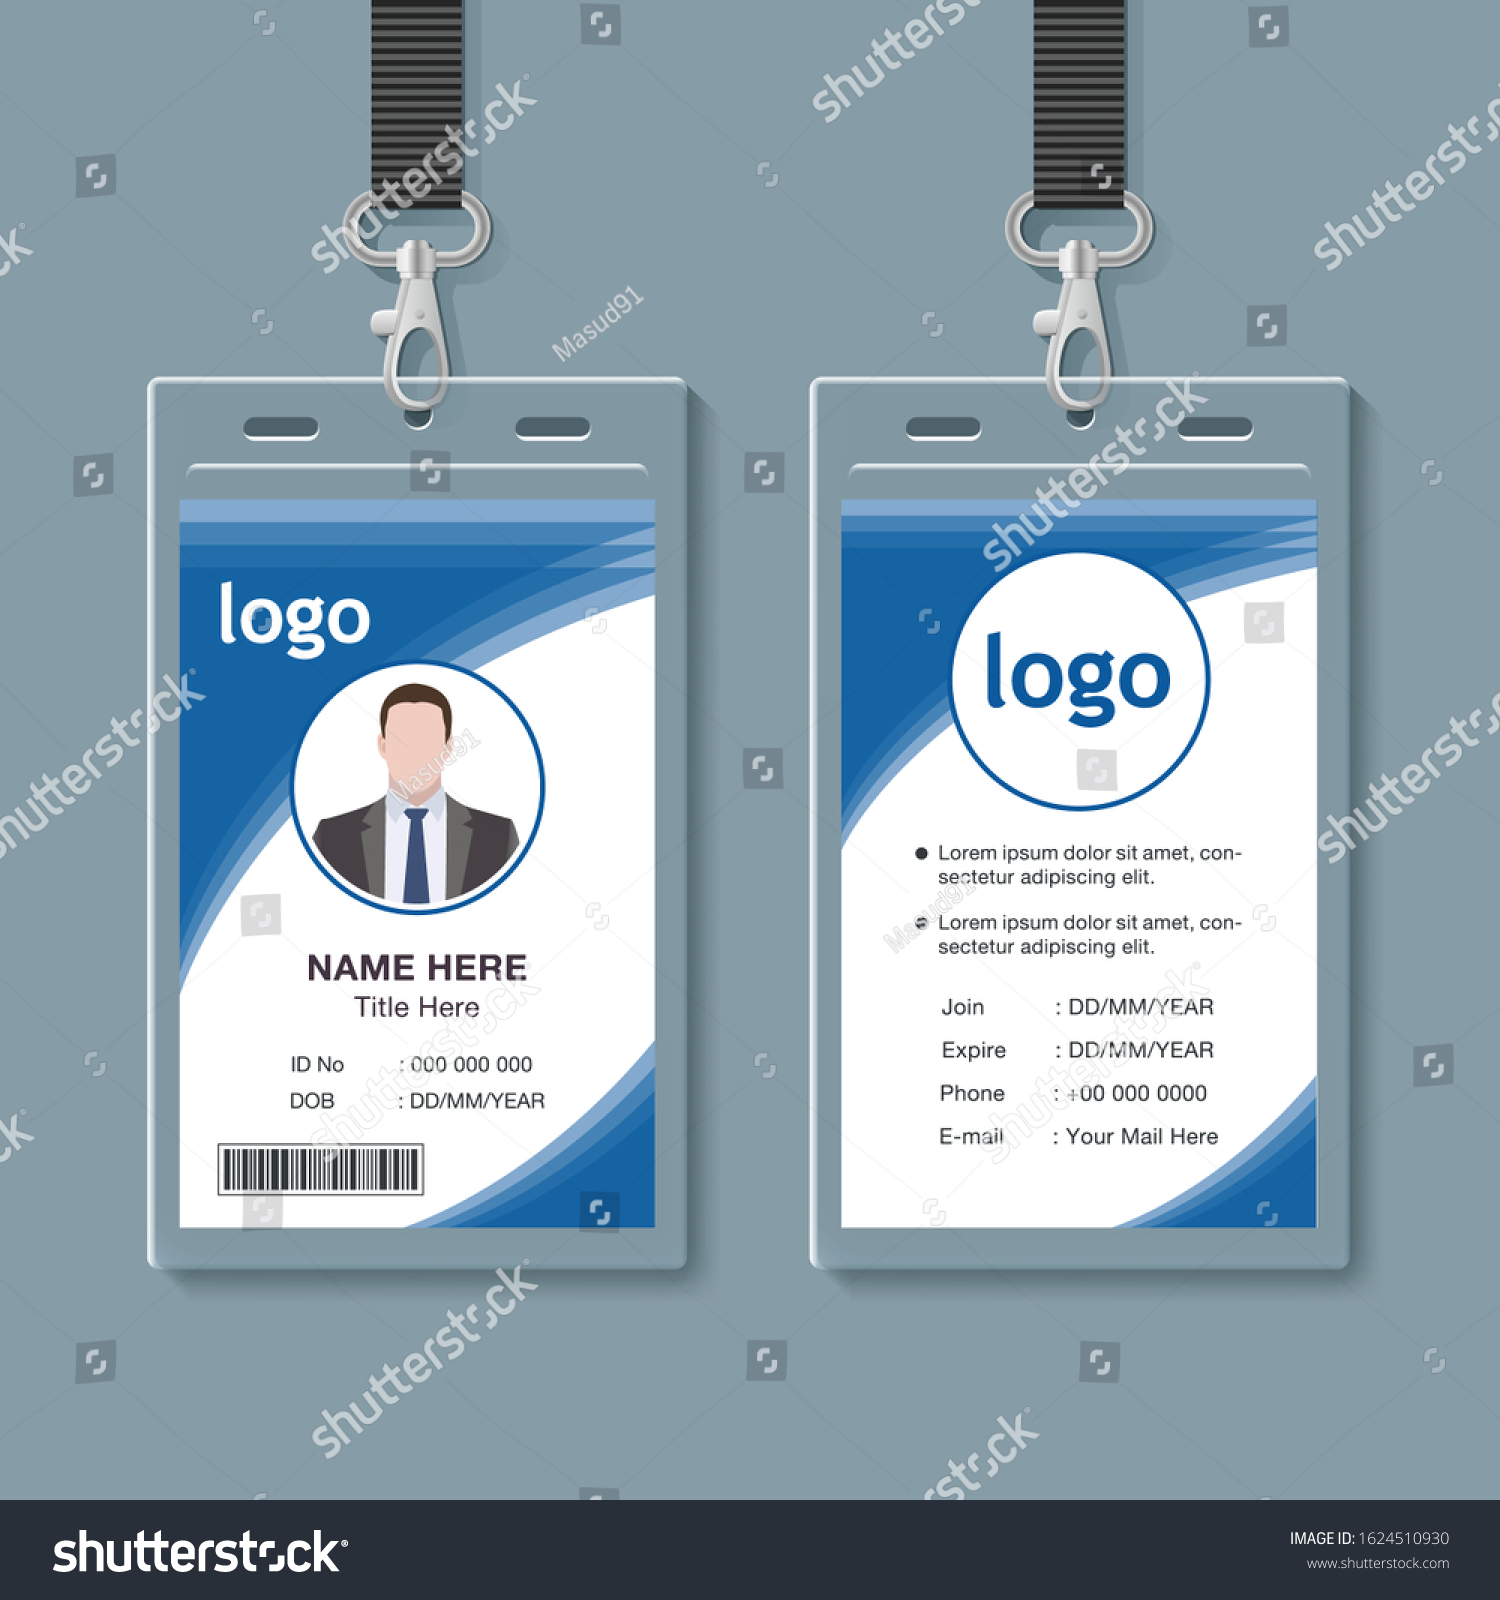 Modern and unique  ID card design template
 #1624510930